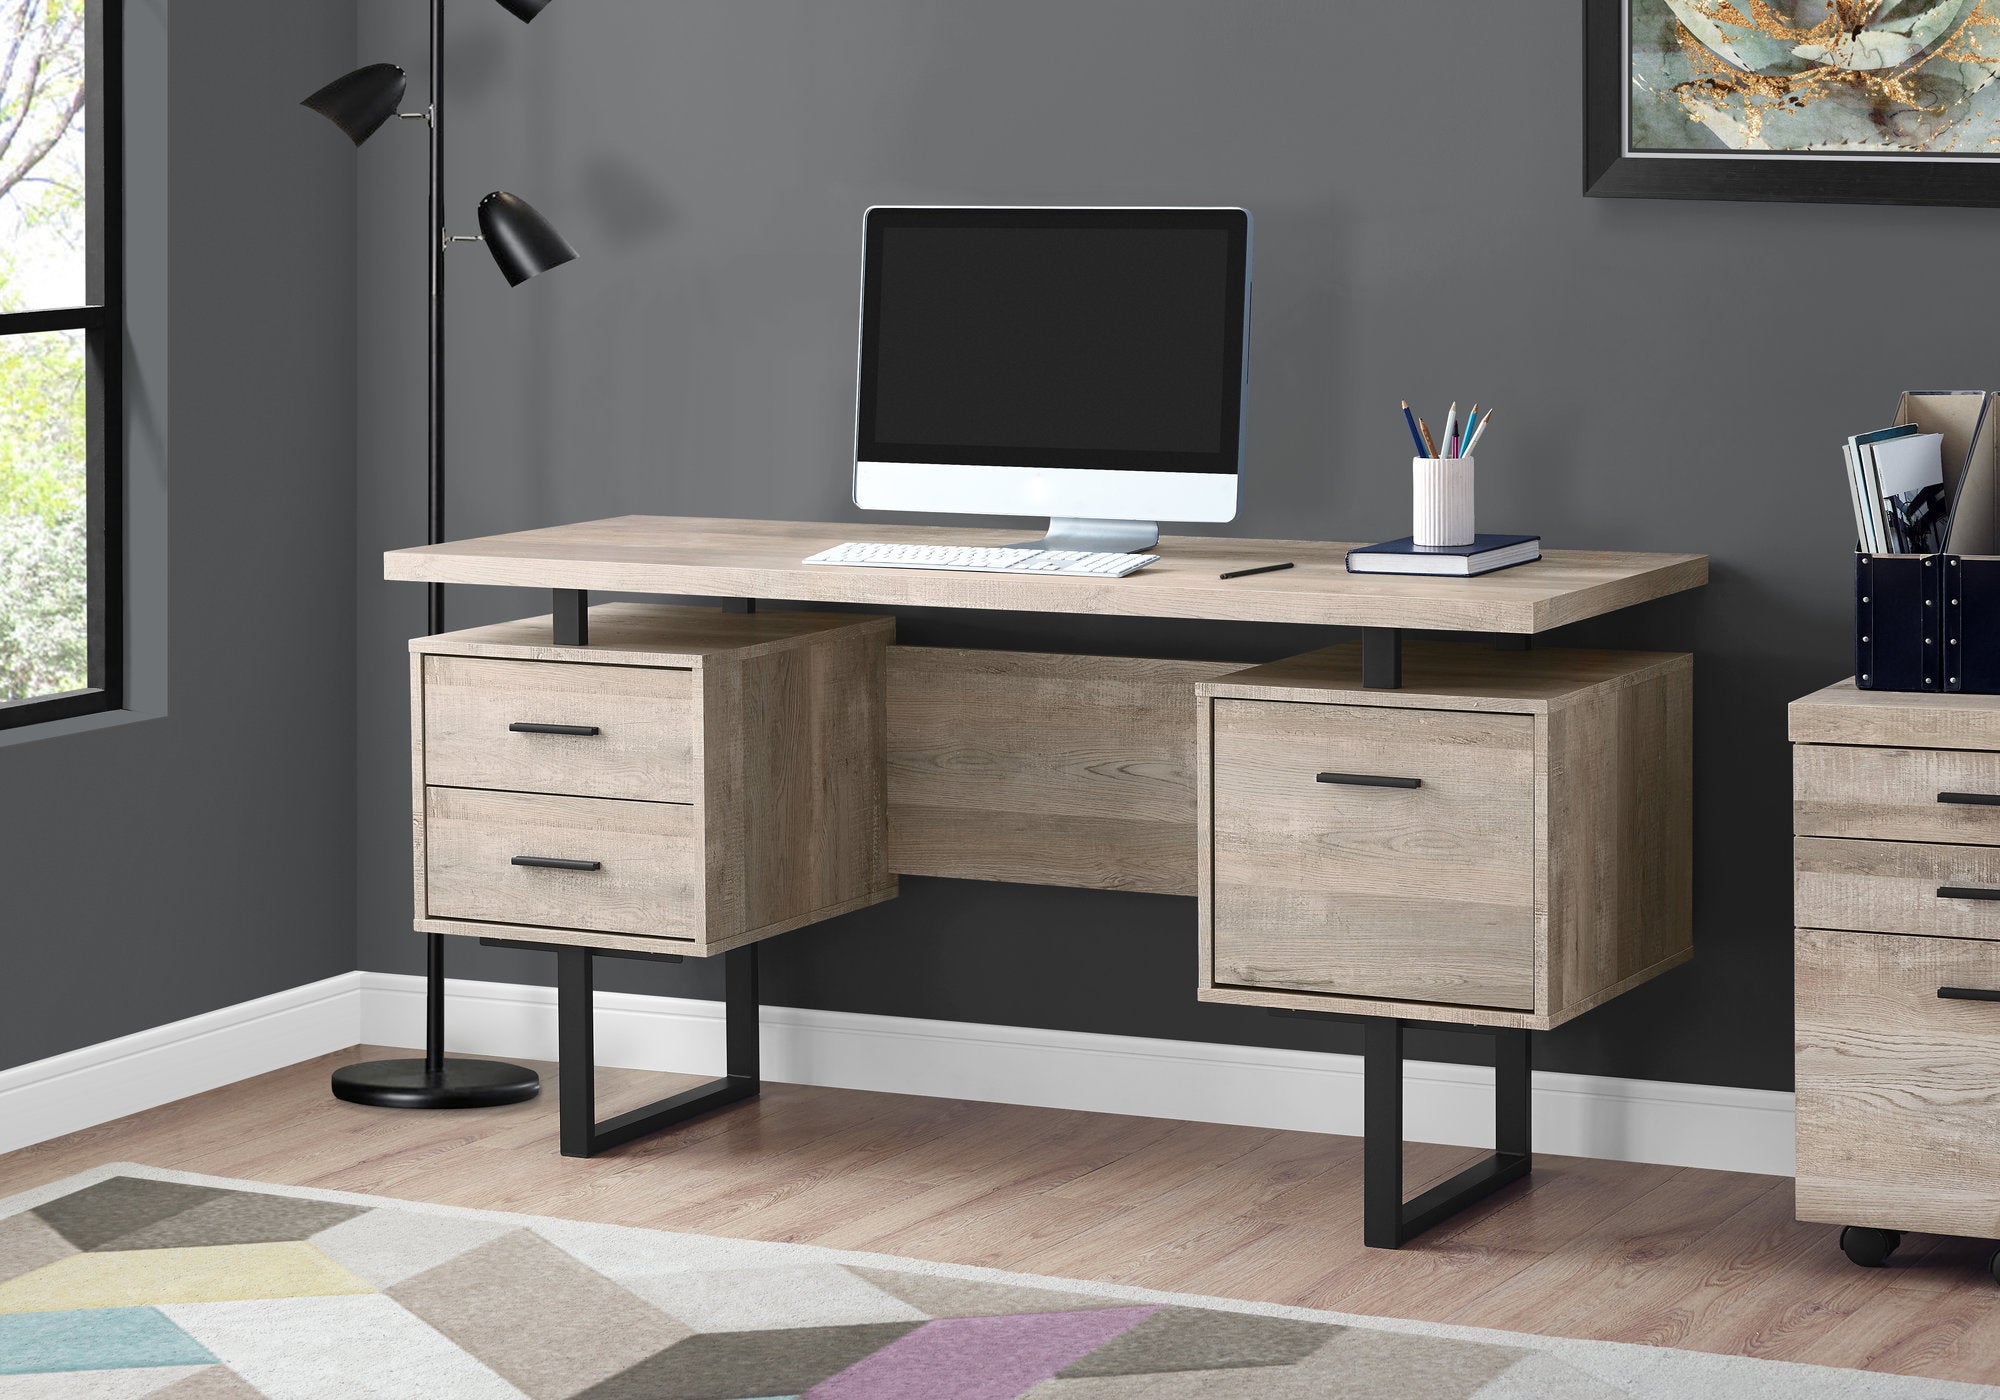 MN-847418    Computer Desk, Home Office, Laptop, Left, Right Set-Up, Storage Drawers, 60"L, Metal, Laminate, Taupe Reclaimed Wood Look, Black, Contemporary, Modern